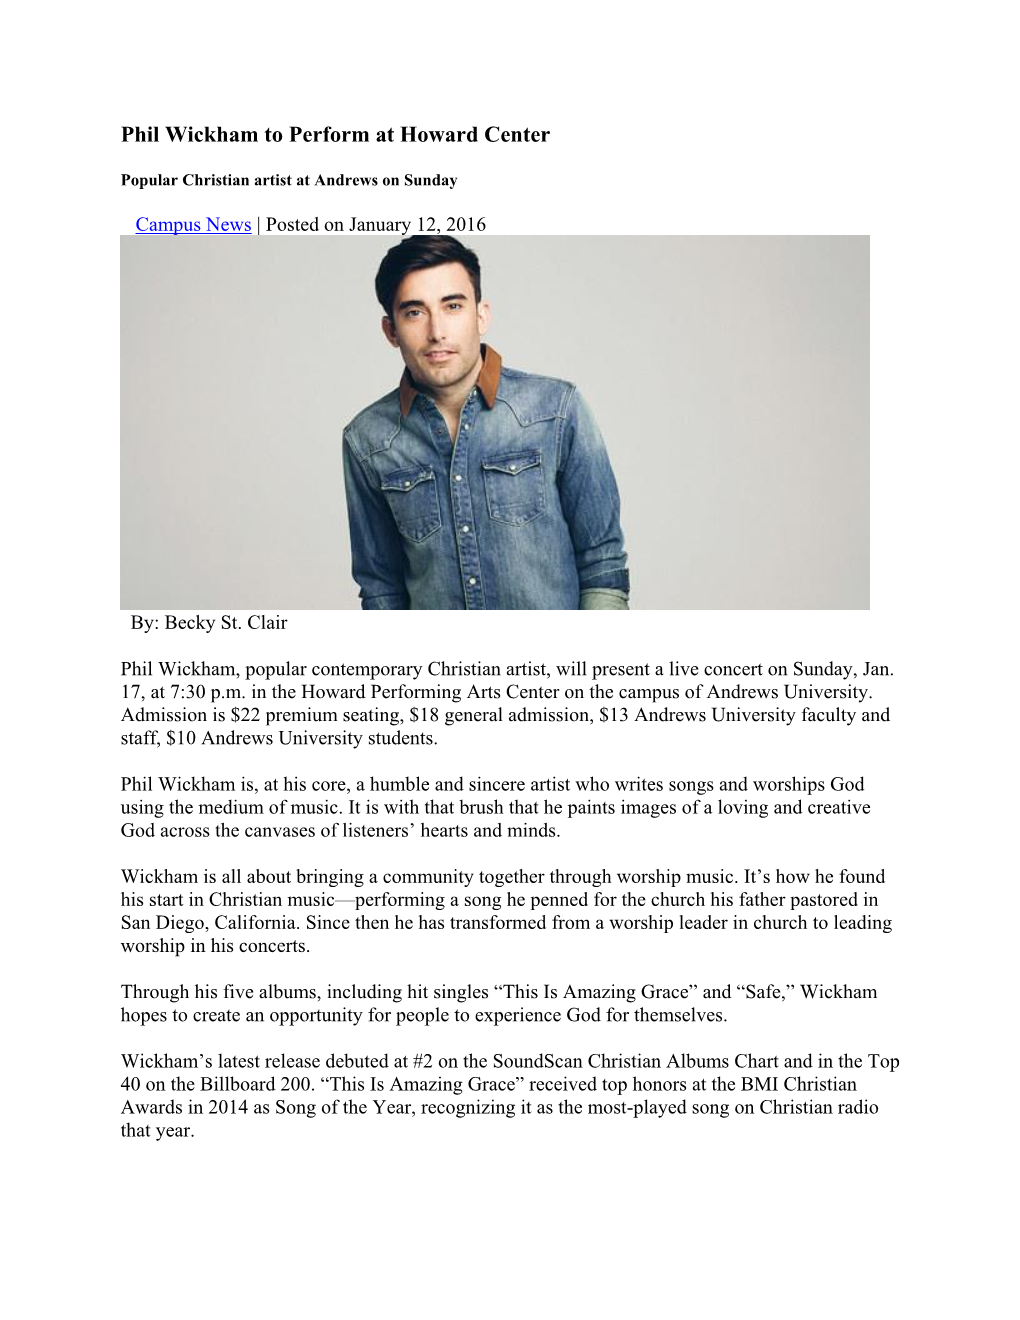 Phil Wickham to Perform at Howard Center